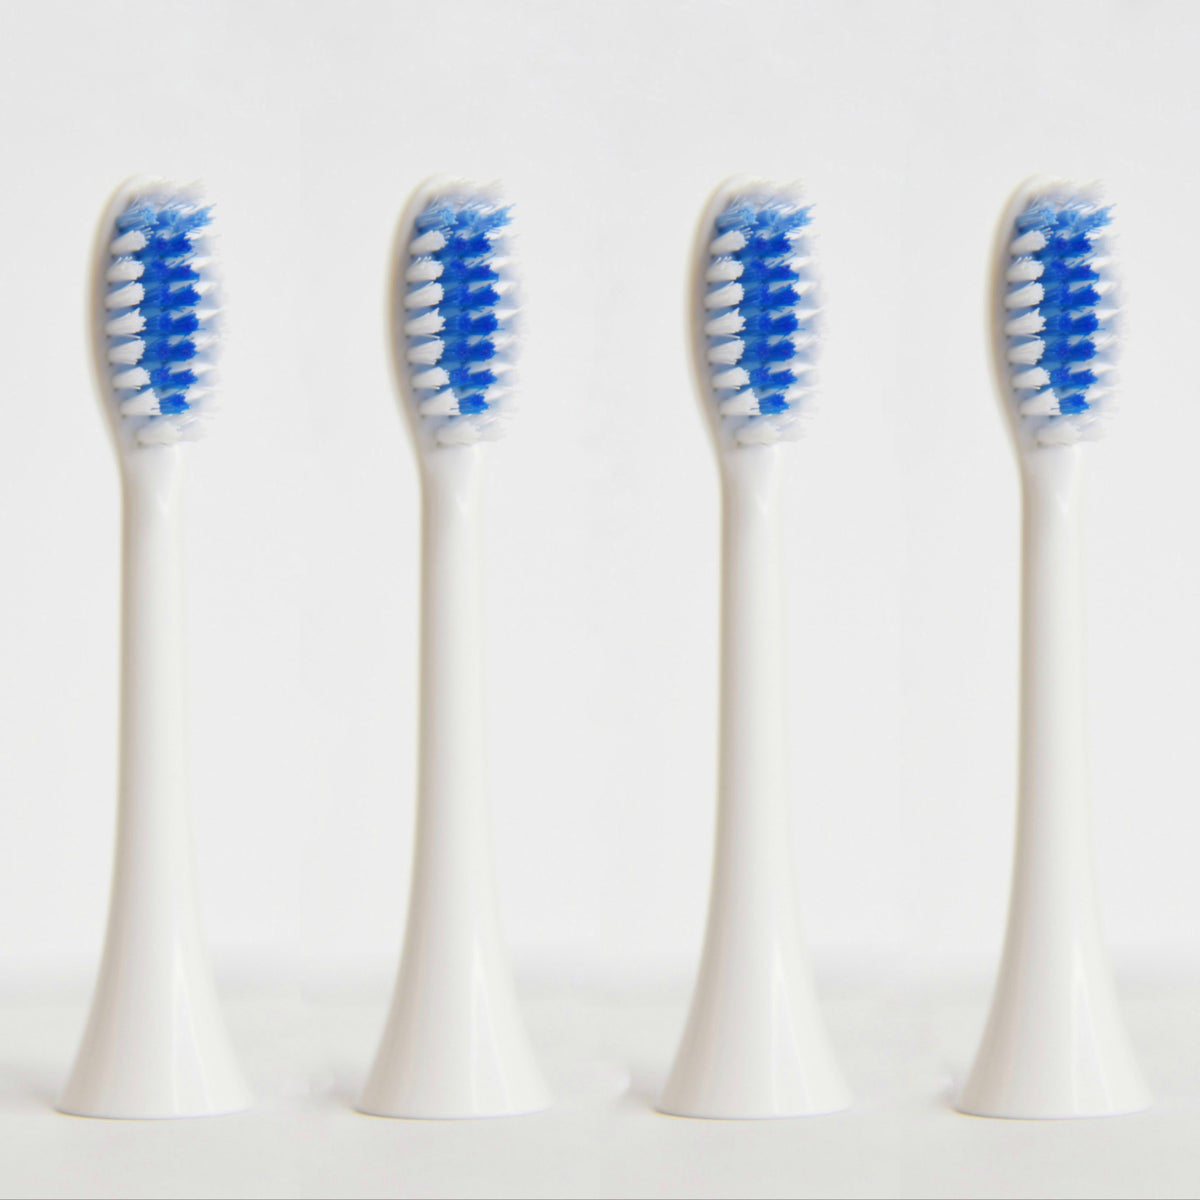 Toothbrush Replacement Head